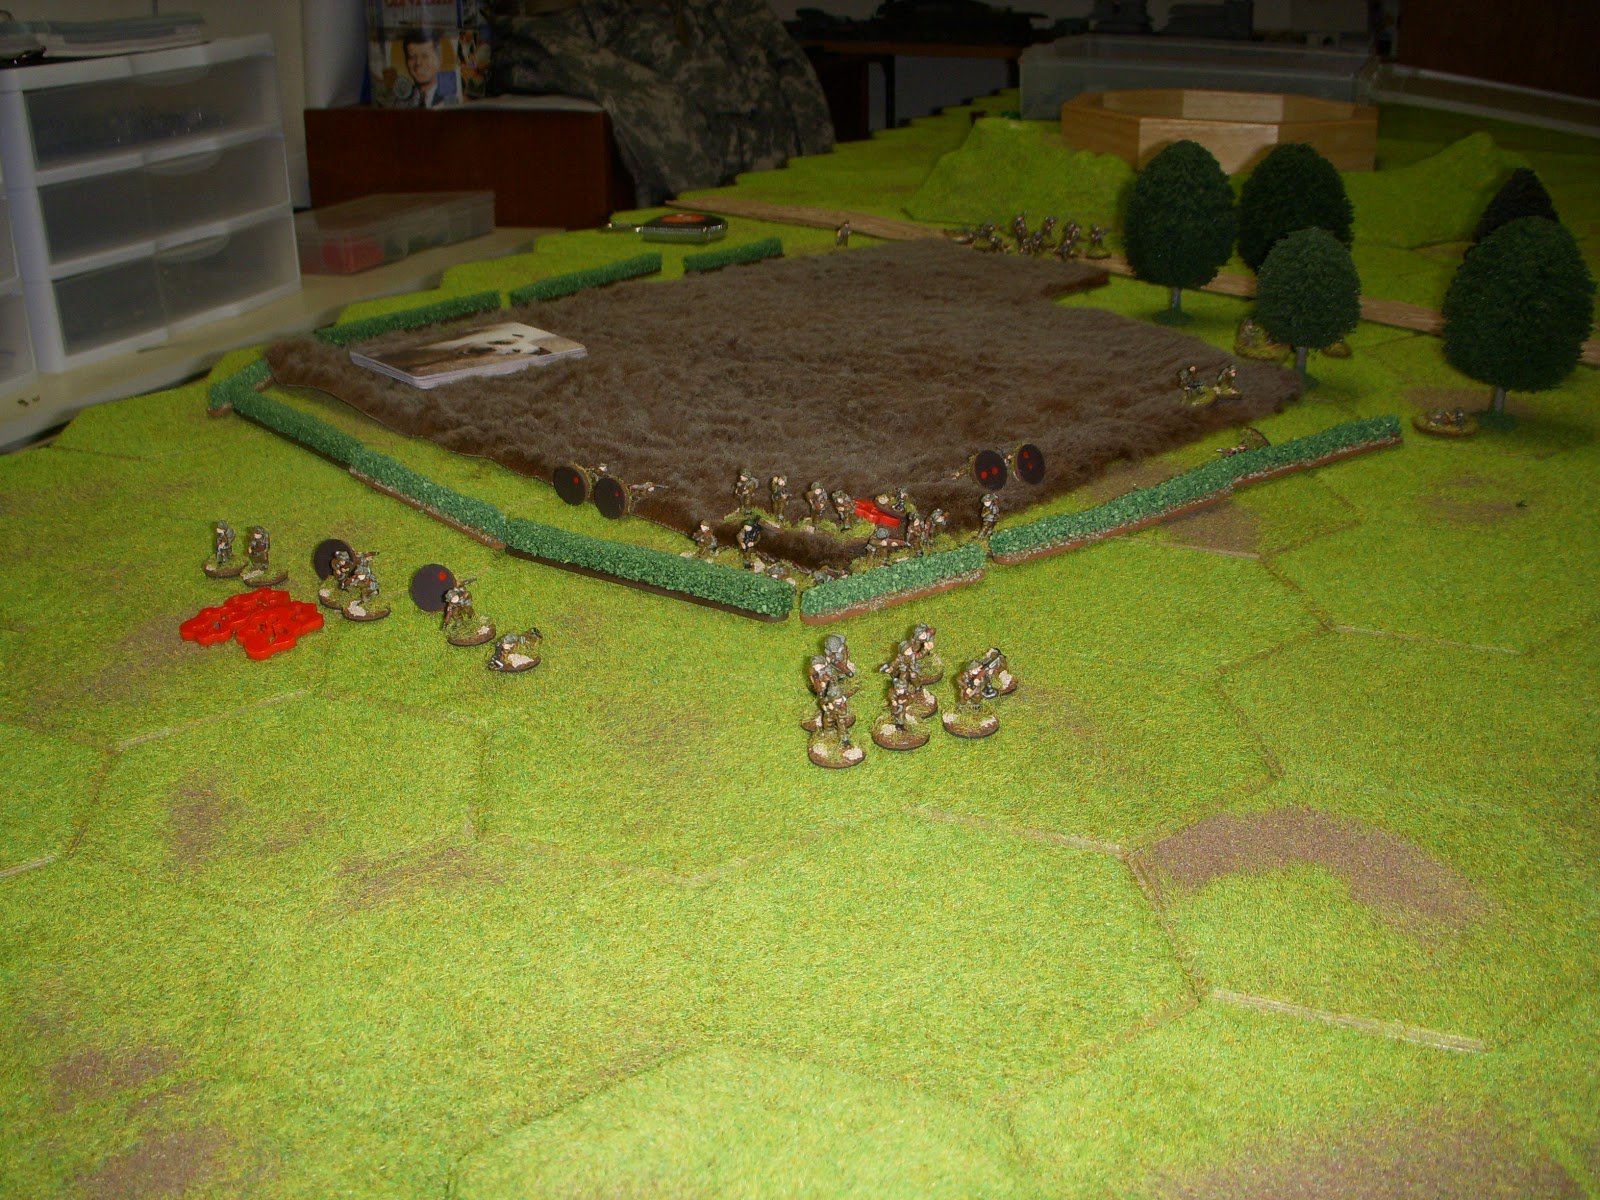  1st Platoon jumps the gun and starts to attack before effective smoke obscures the MG in the house. Casualties are heavy. 